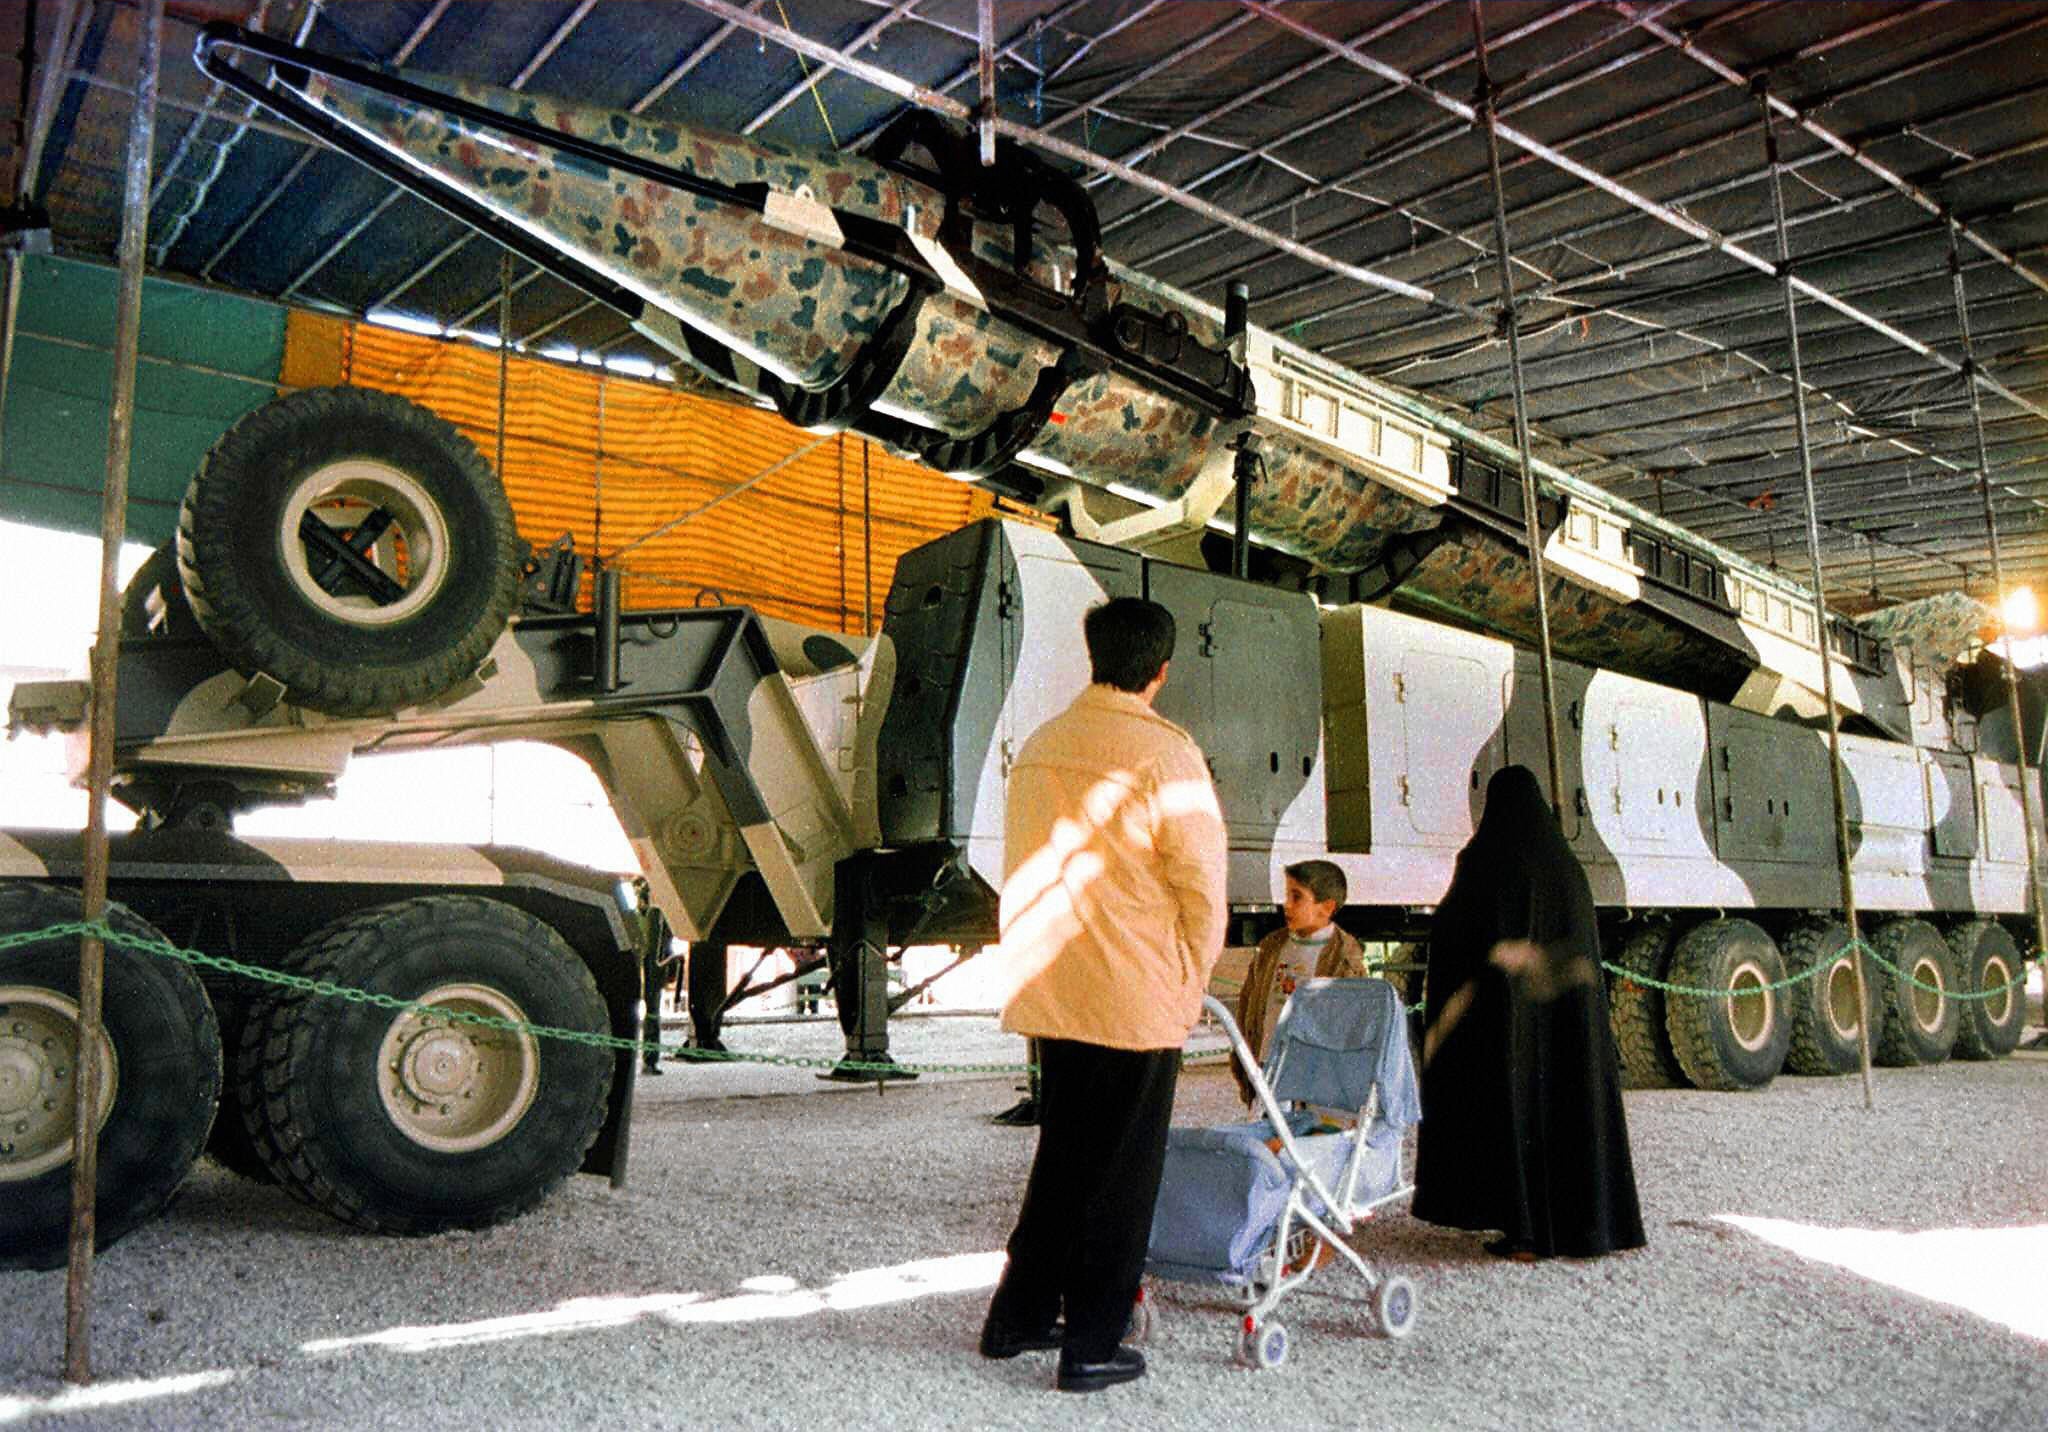 A Shahab-3 missile displayed at a weapons exhibition at Tehran’s main fairground